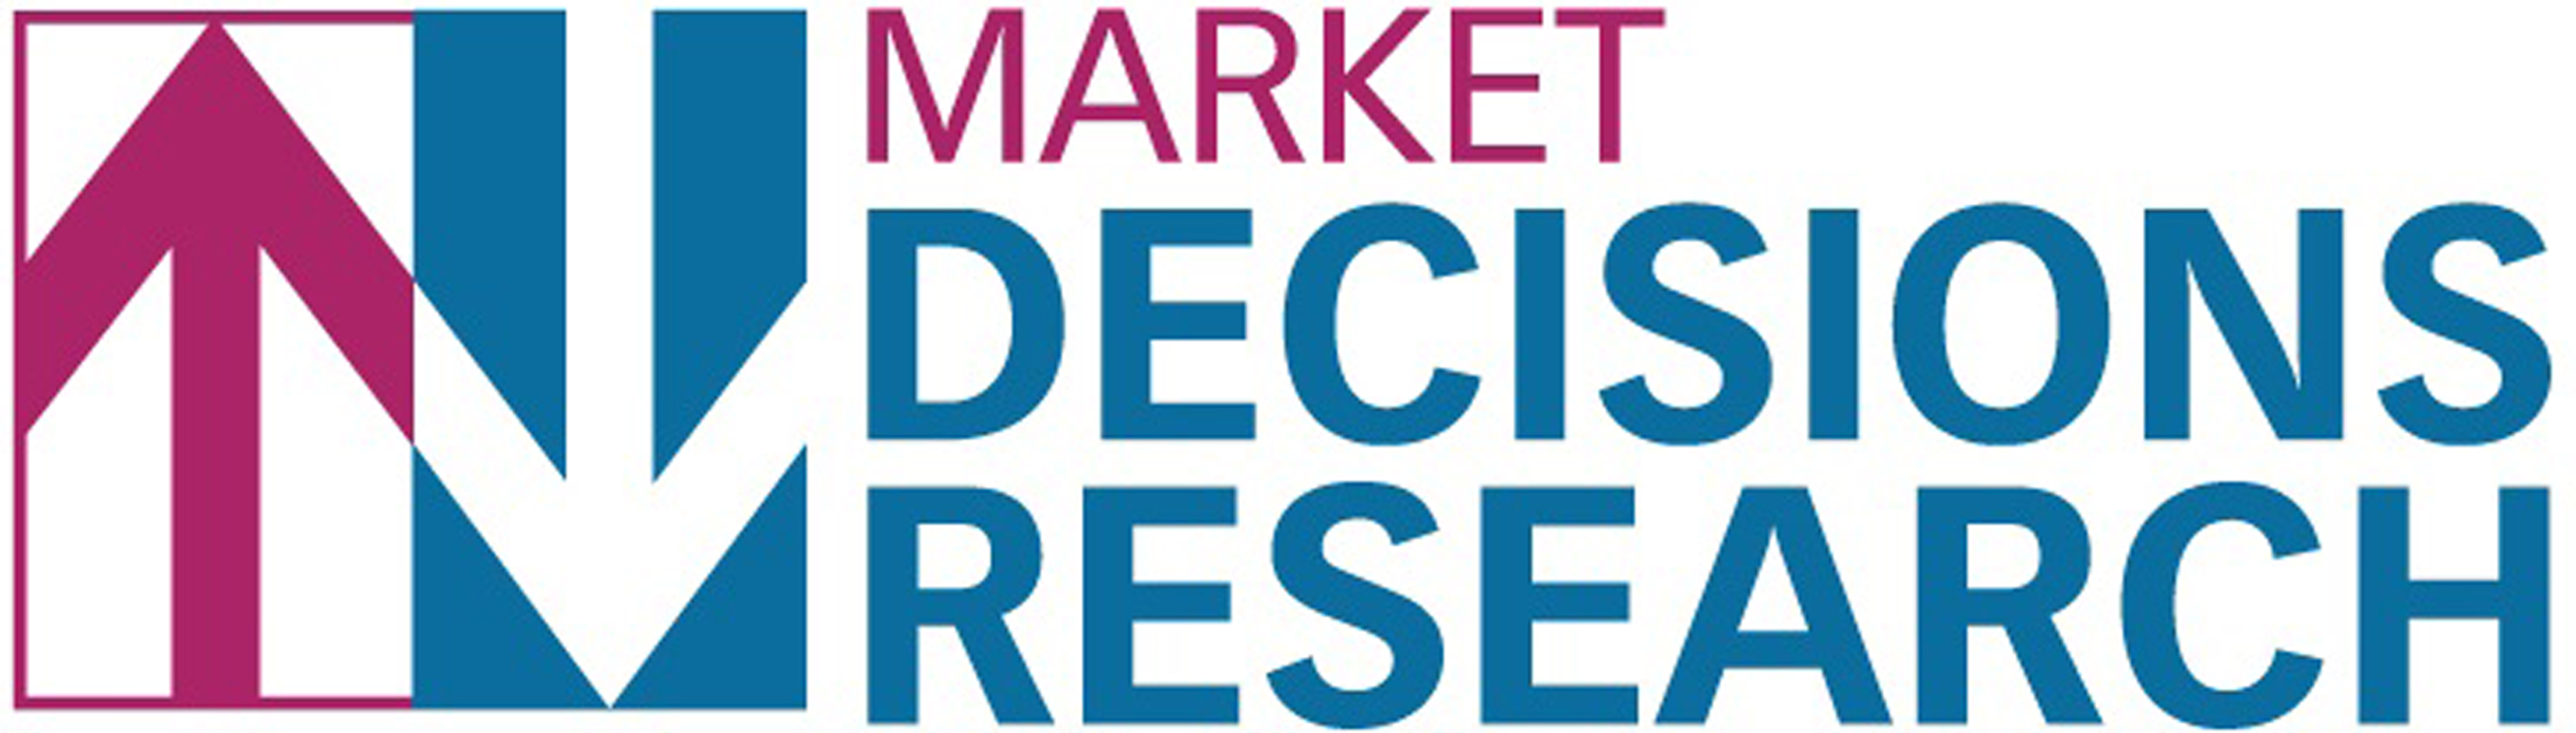 Market Decisions Research Group